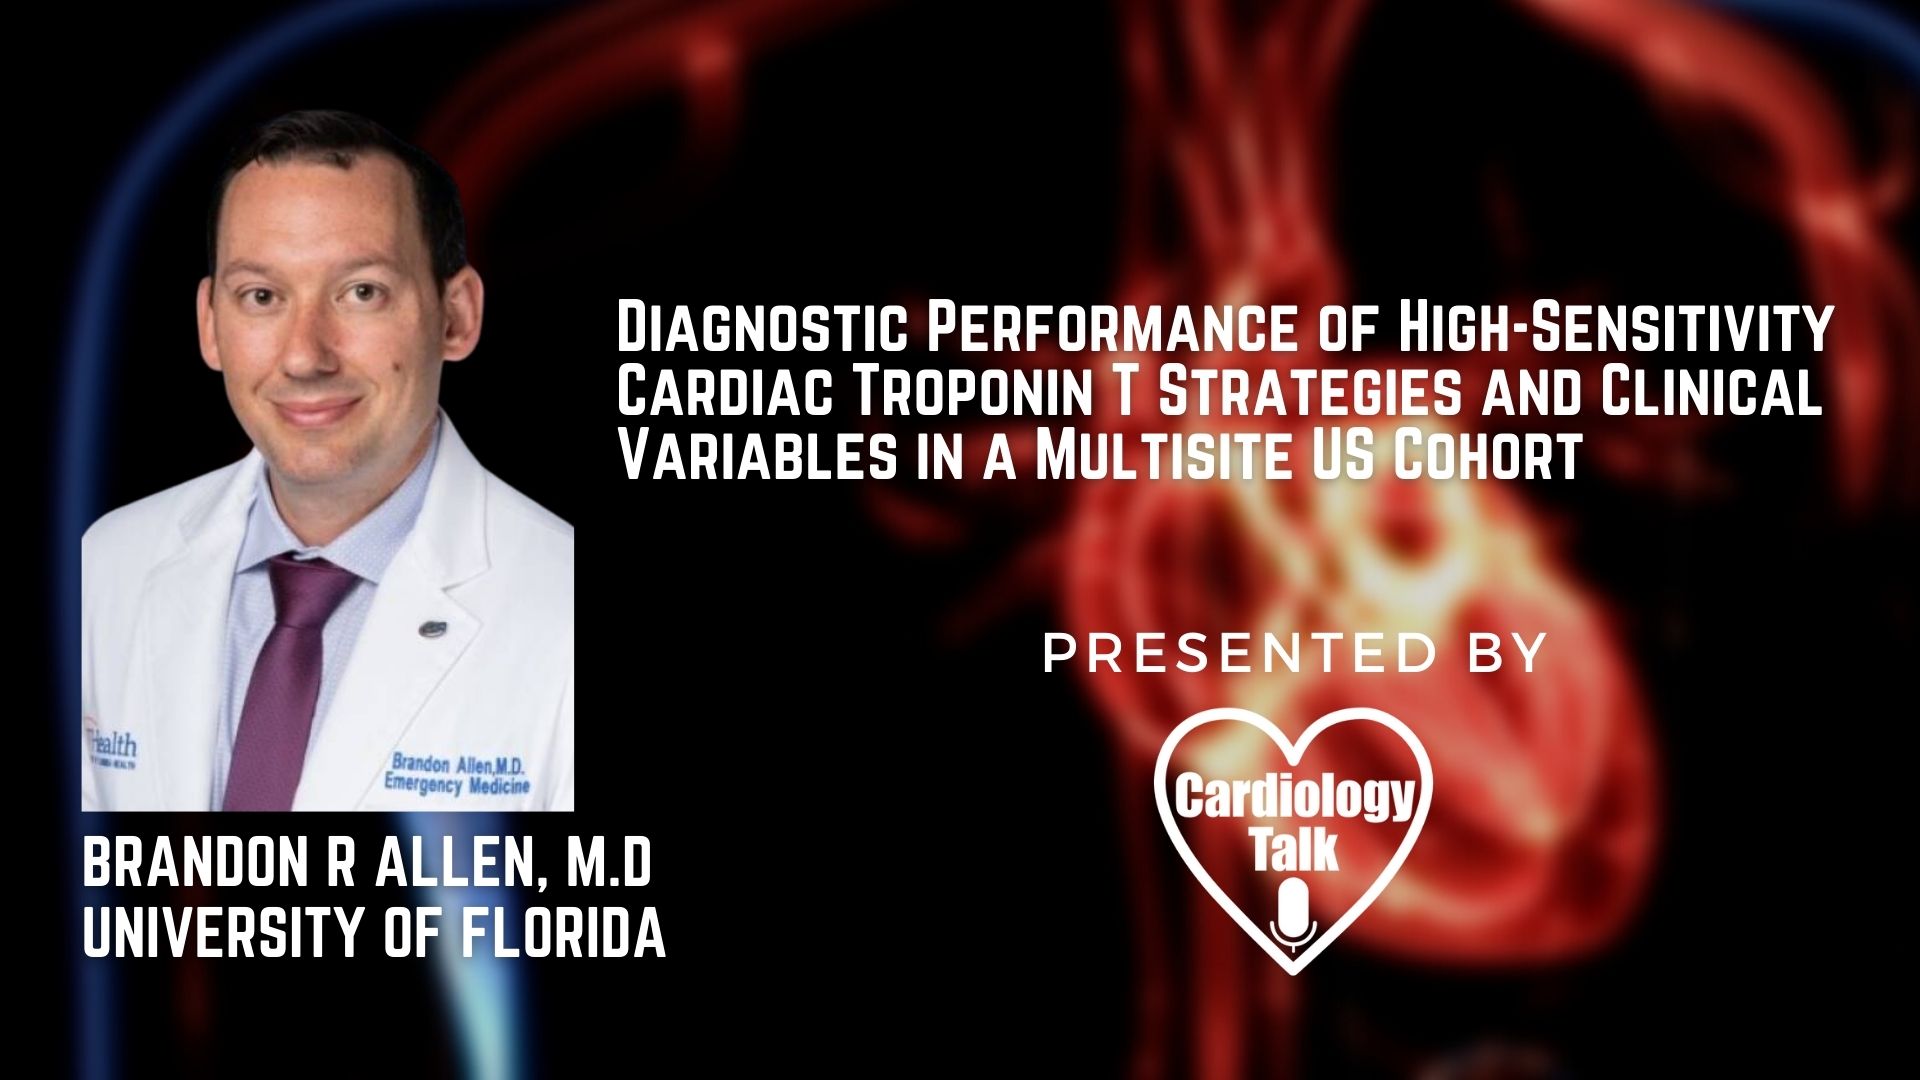 Brandon Allen, MD- Diagnostic Performance of High-Sensitivity Cardiac Troponin T Strategies and Clinical Variables in a Multisite US Cohort  #UFHealth  #UniversityOfFlorida  #Cardiology #...